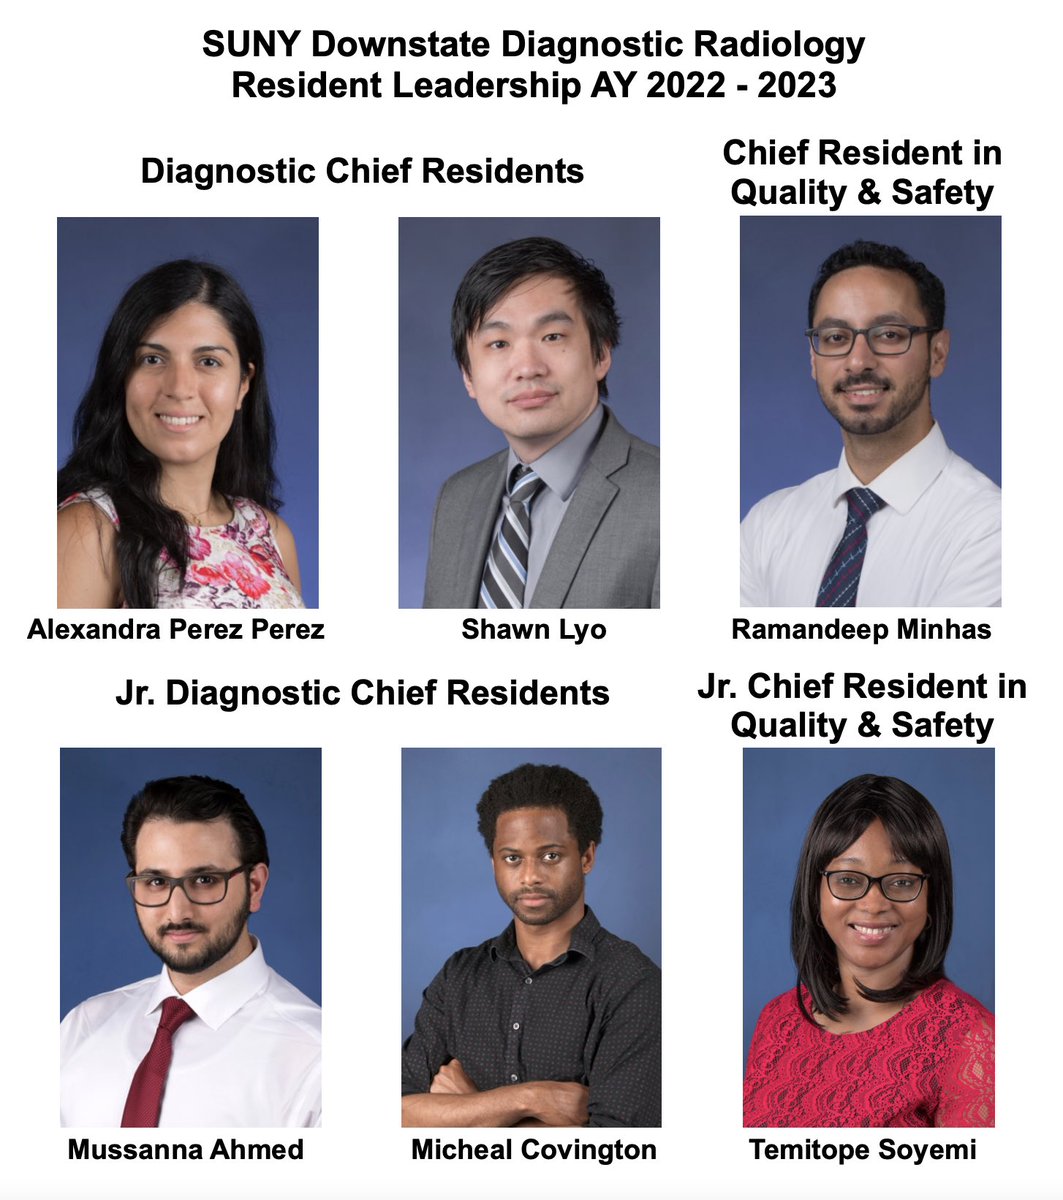 Introducing our Resident Leadership Team AY 2022-2023 @SUNYRadiology ✨✨ Looking forward to an exciting year ahead!